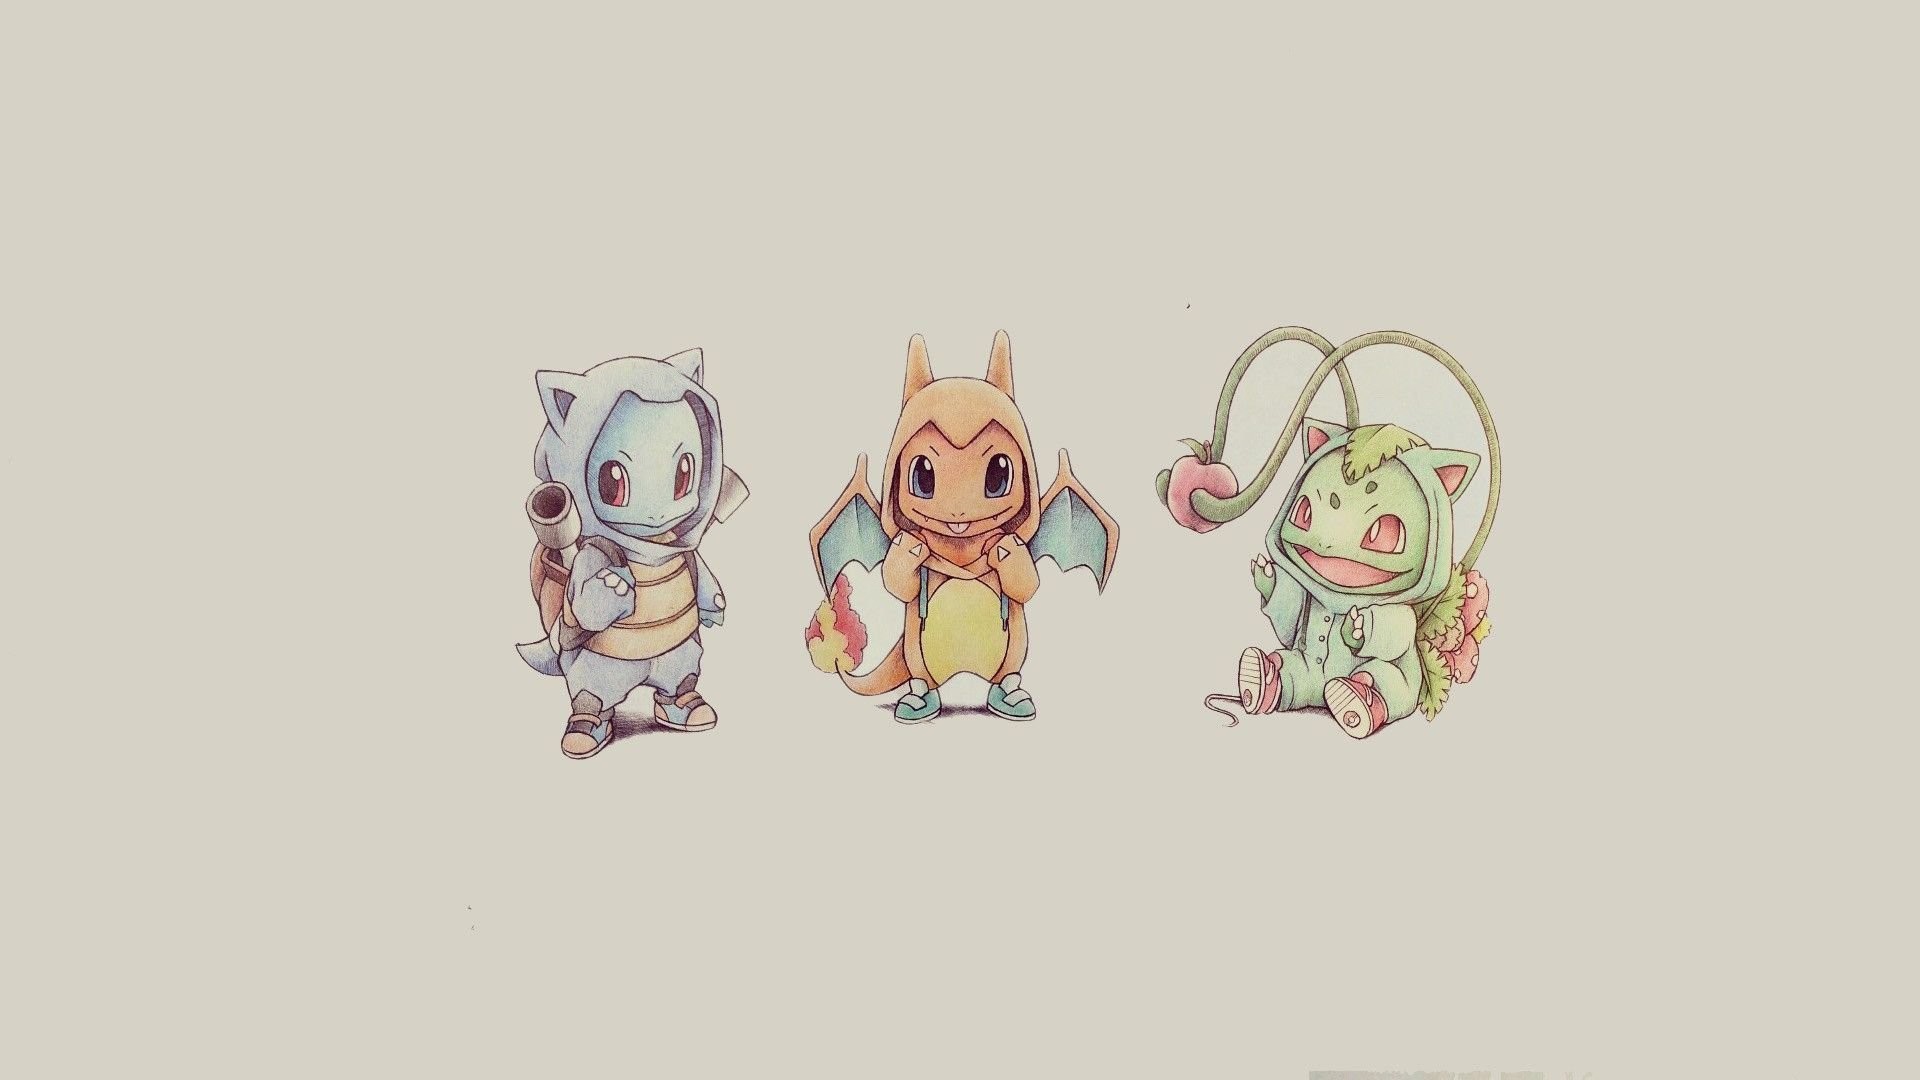 1920x1080 Bulbasaur Squirtle And Charmander - Pokemon